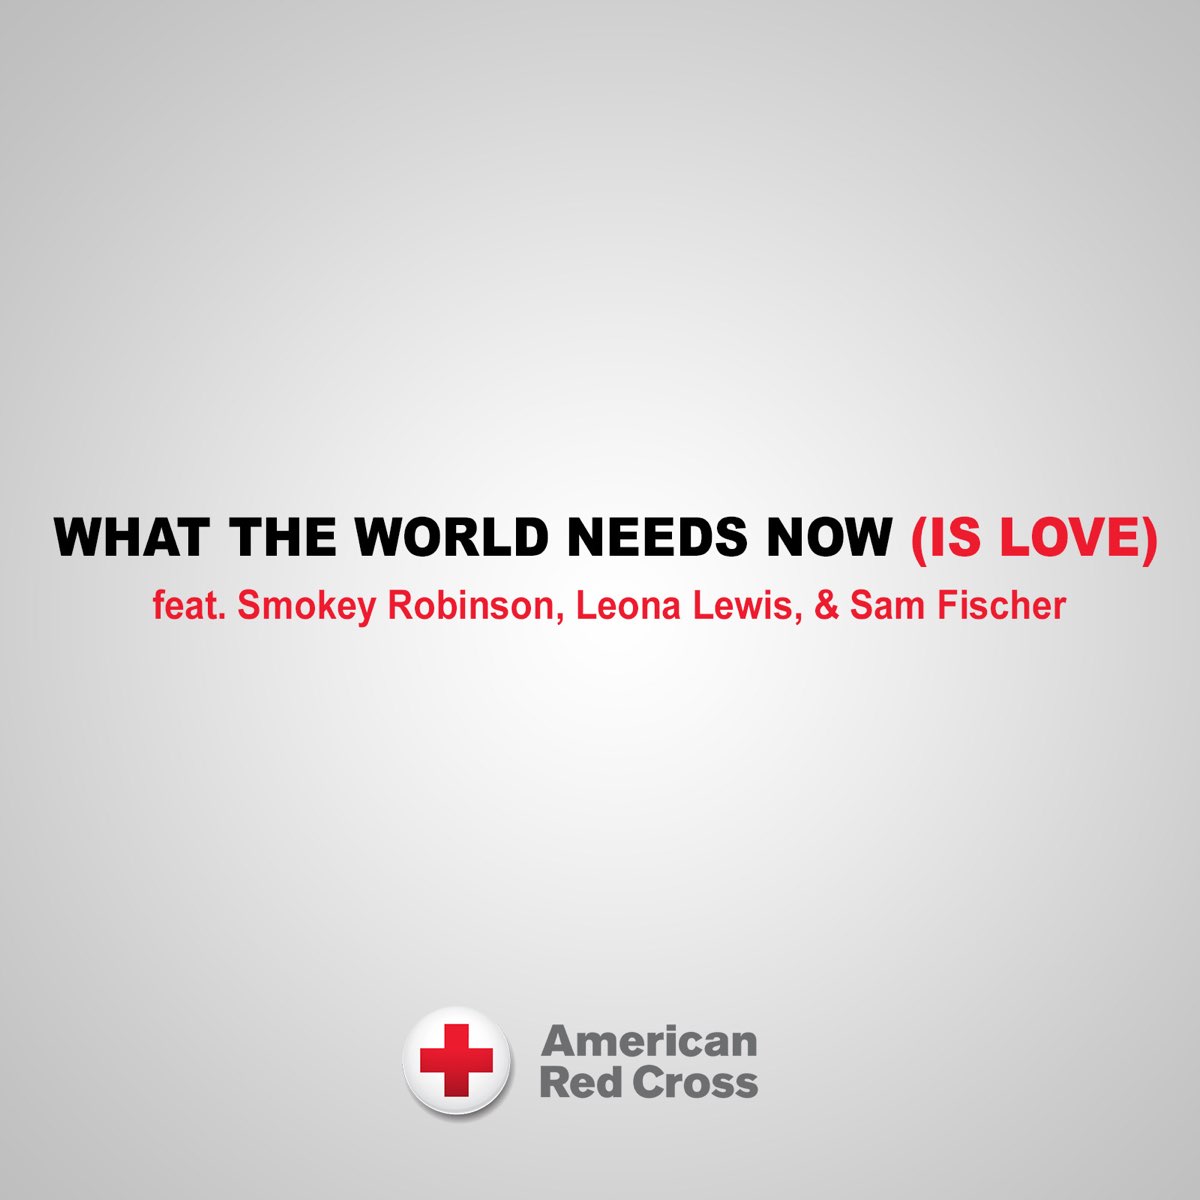 The World needs Love. What the world needs now is love